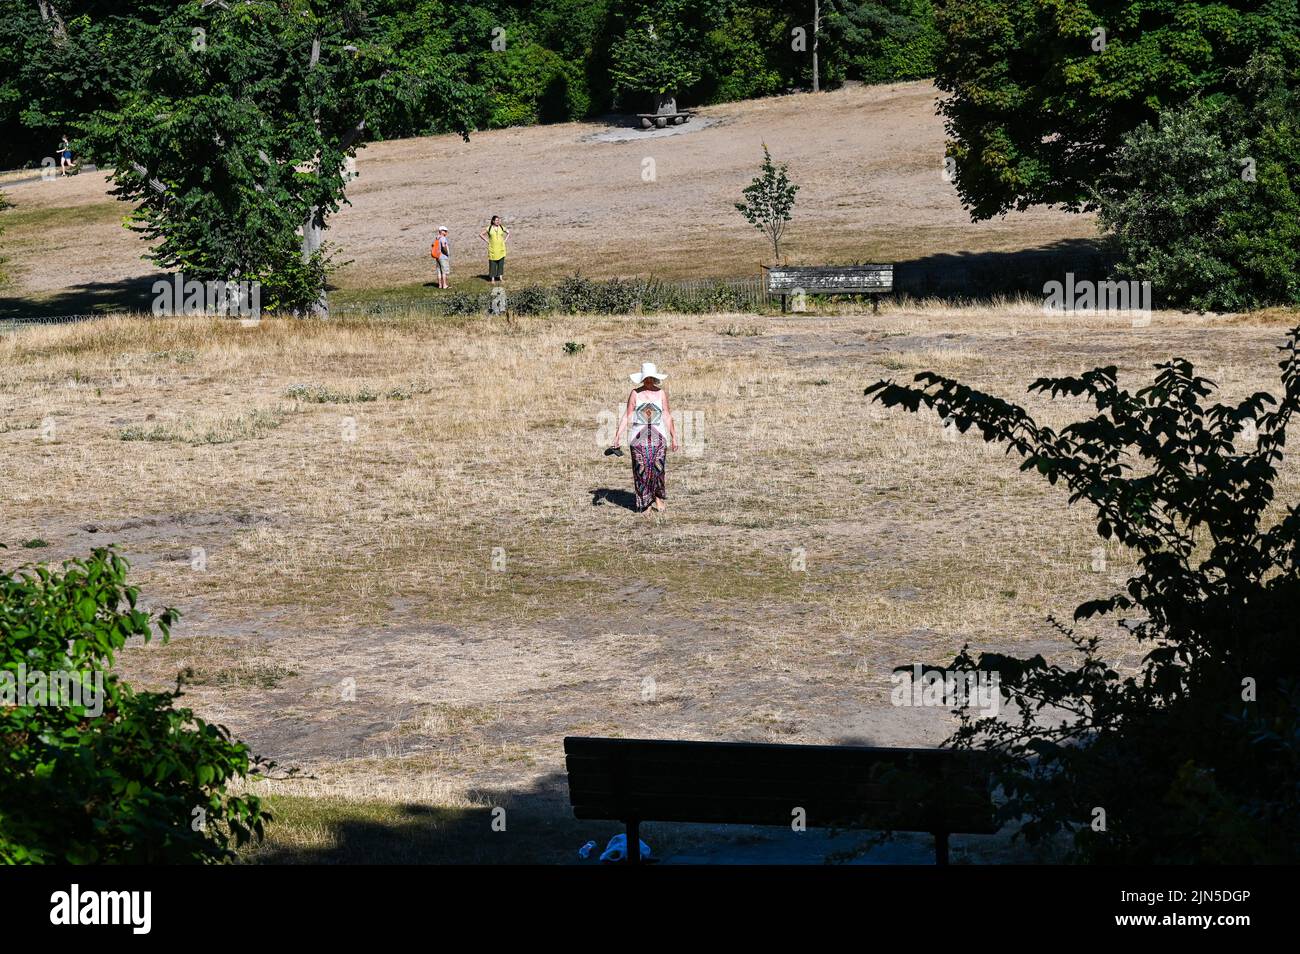 Hove , Brighton UK 9th August 2022 - A woman walks across the burnt parched grass in Queens Park Brighton on another dry hot sunny day as some Water Companies are imposing hosepipe bans in parts of Britain this week : Credit Simon Dack / Alamy Live News Stock Photo